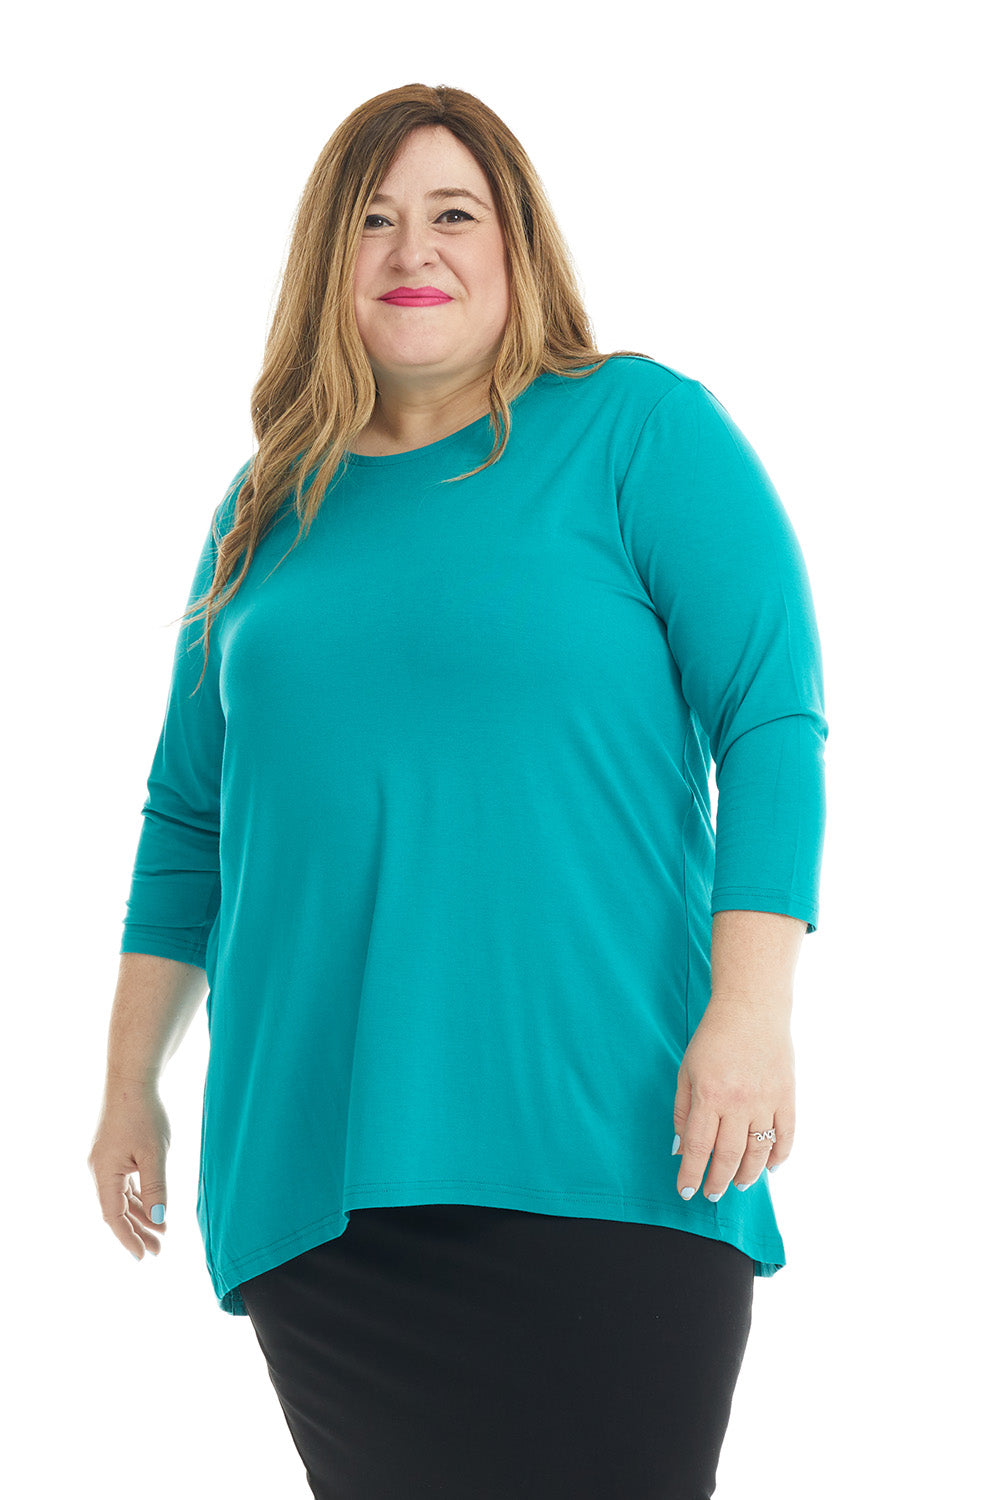 turquoise basic plus size top to wear with jean skirts